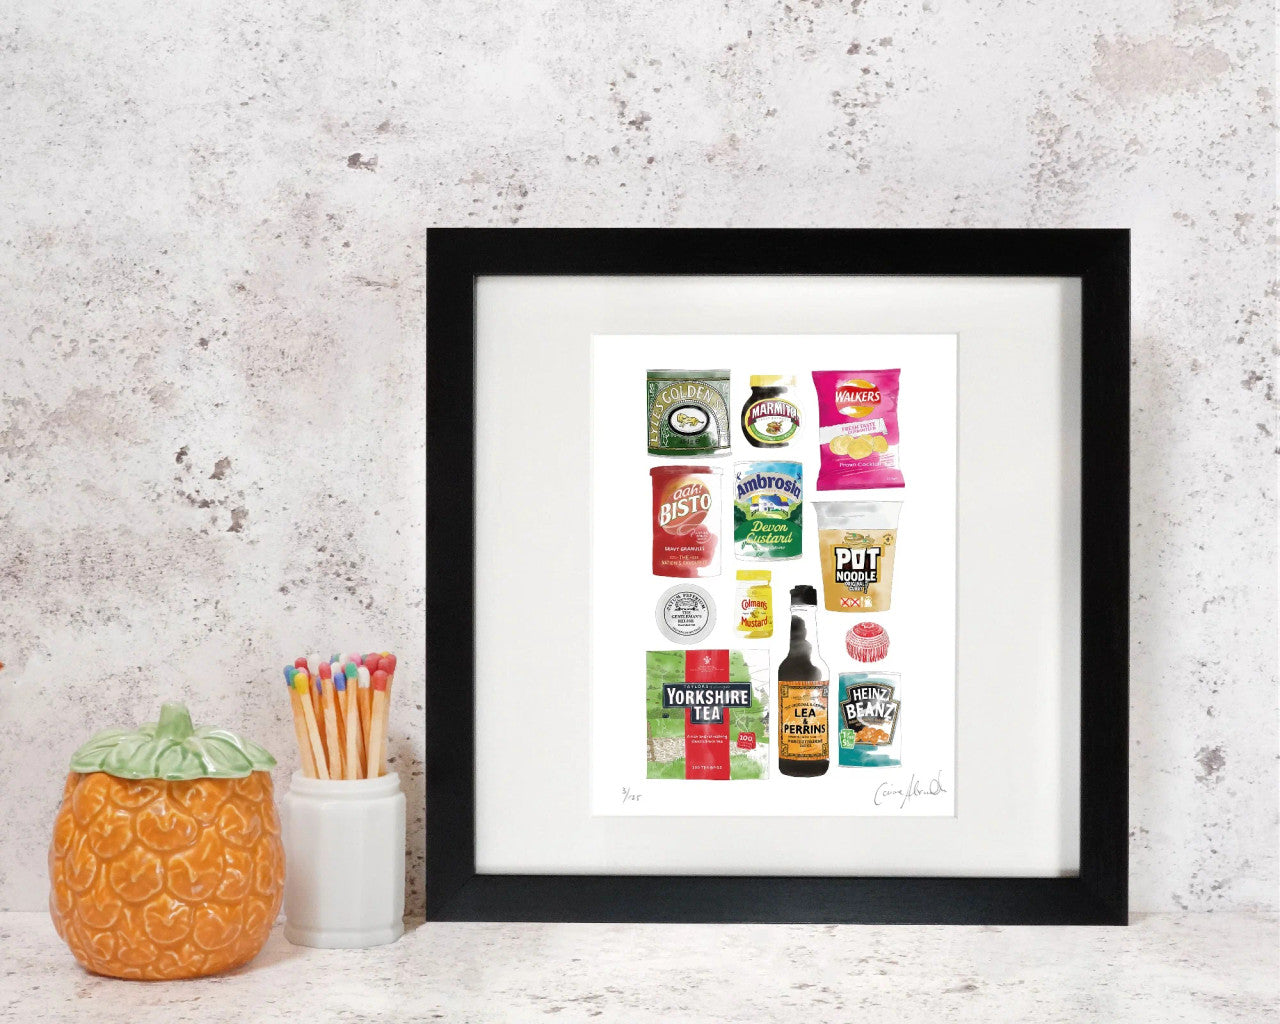 Store Cupboard Framed Print by Corinne Alexander. Made in England.